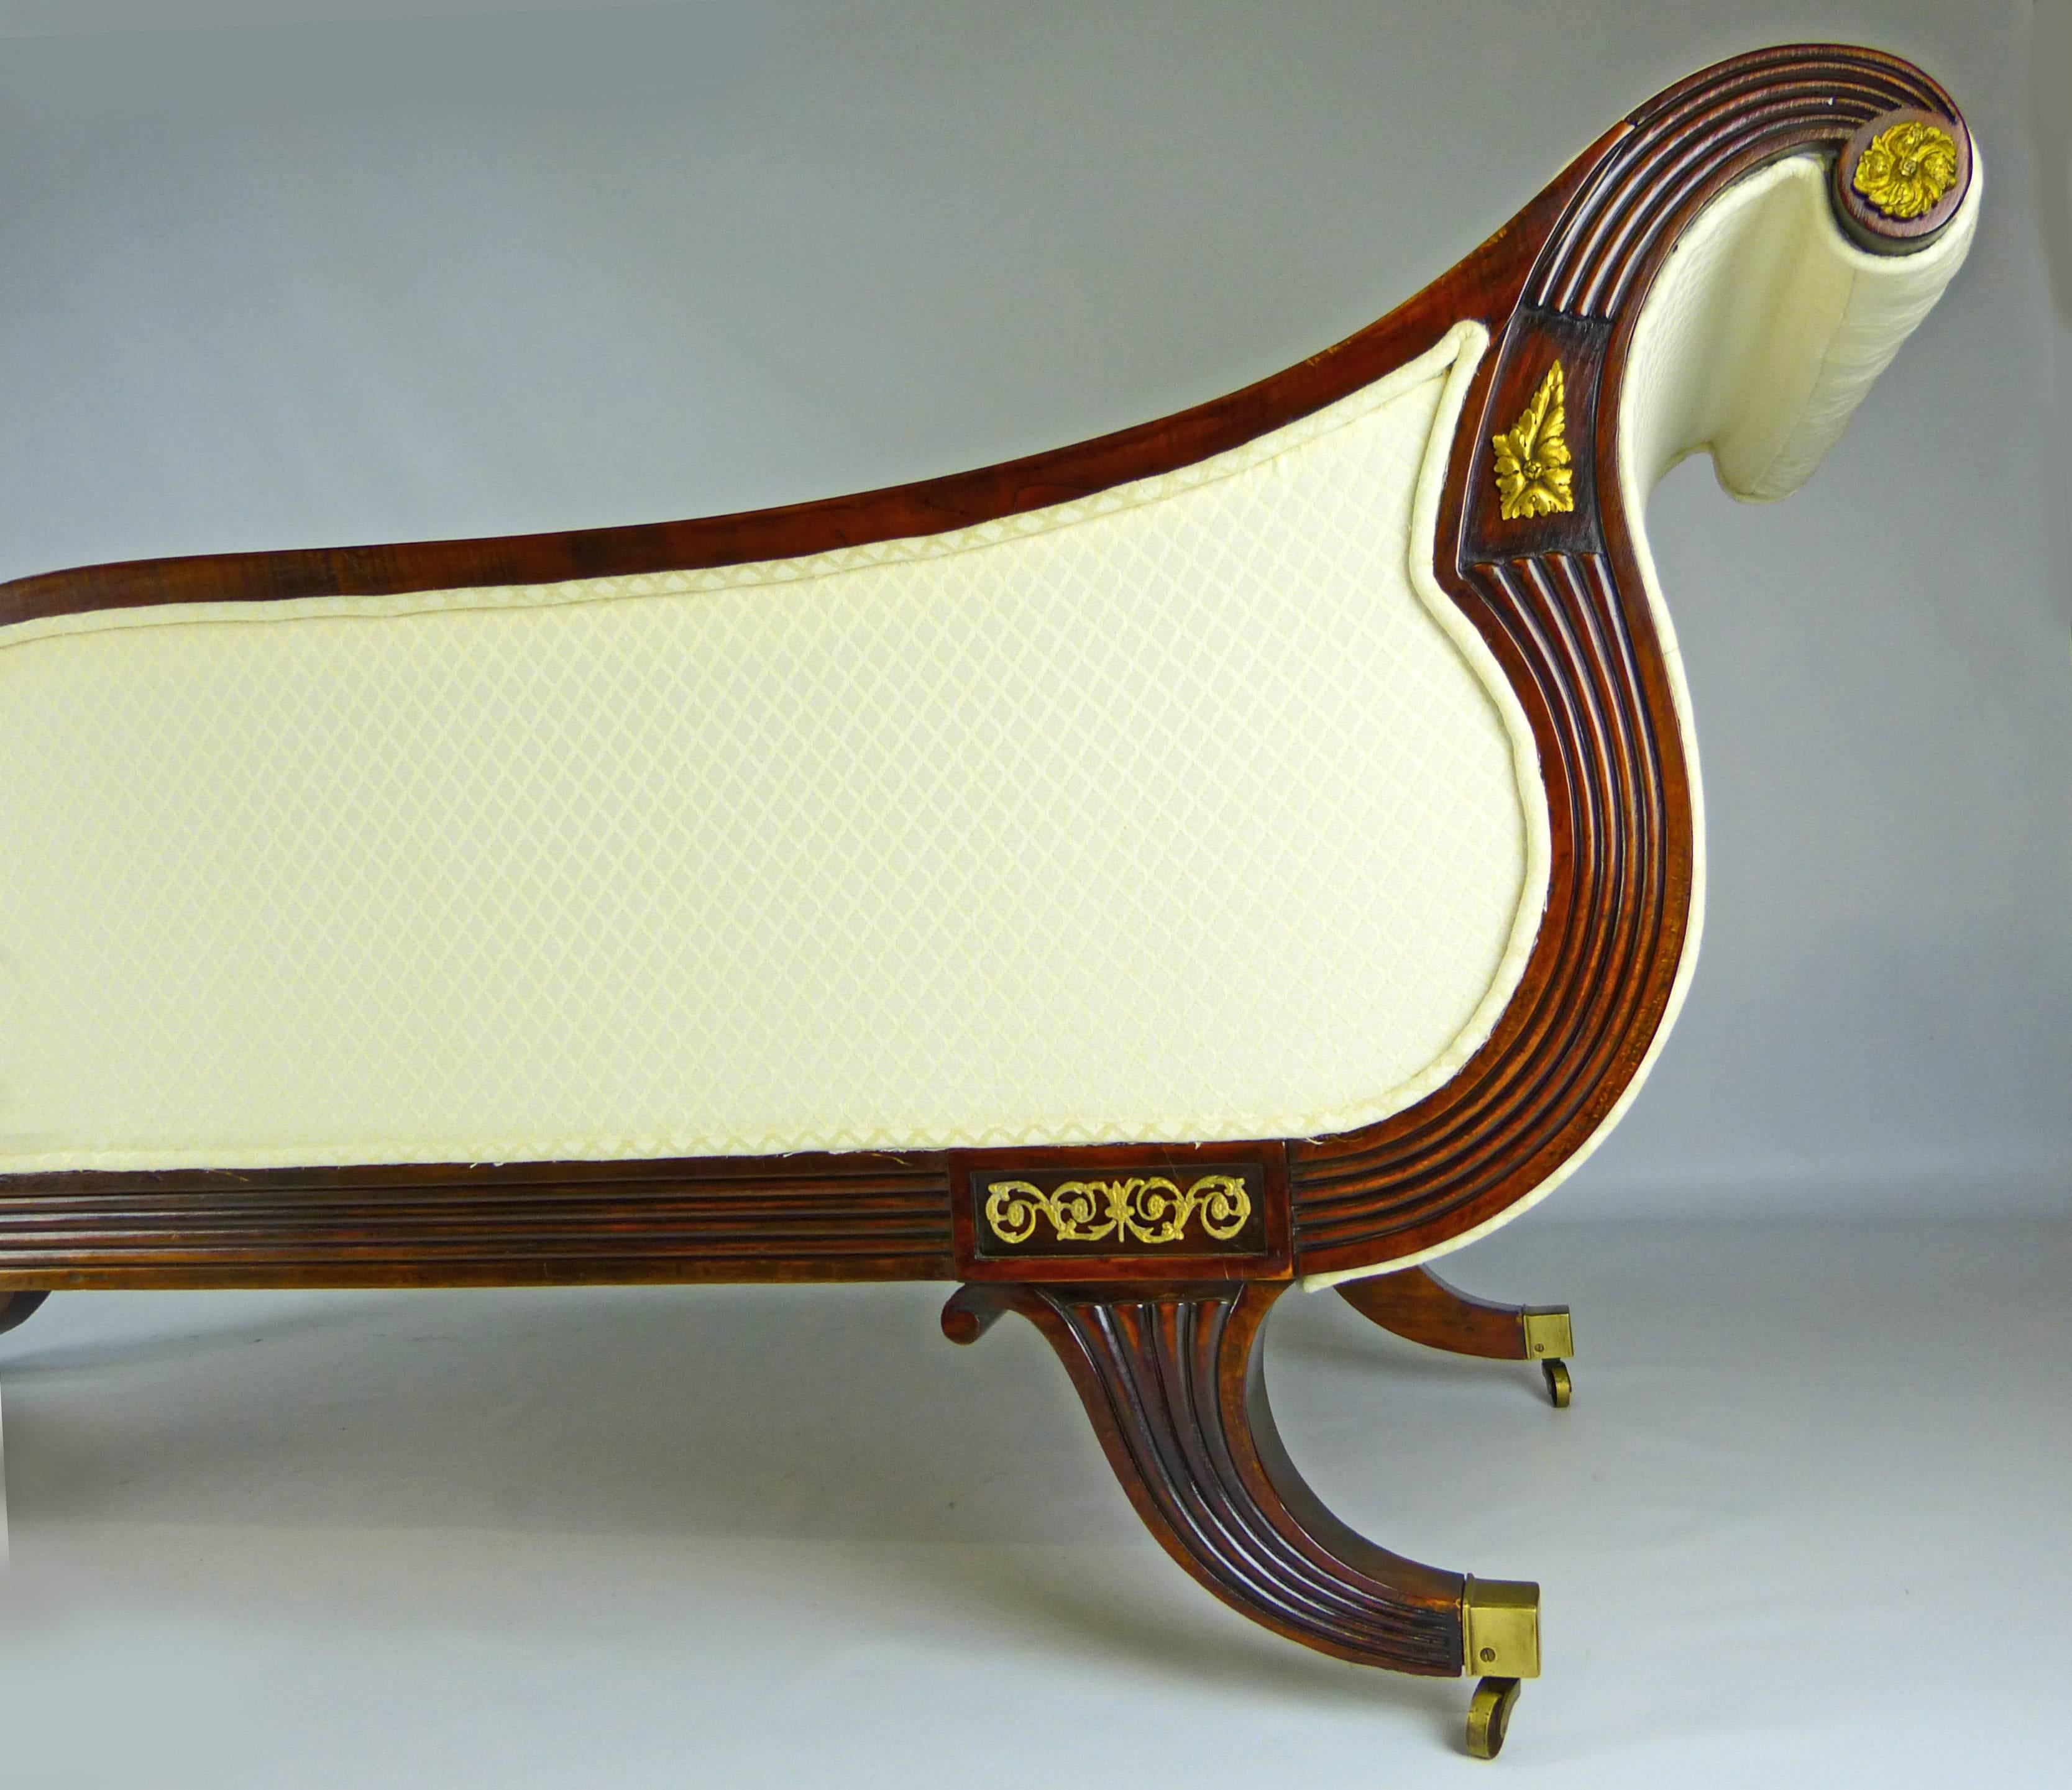 Carved Chaise Long or Daybed Early 19th Century American - RETIREMENT SALE